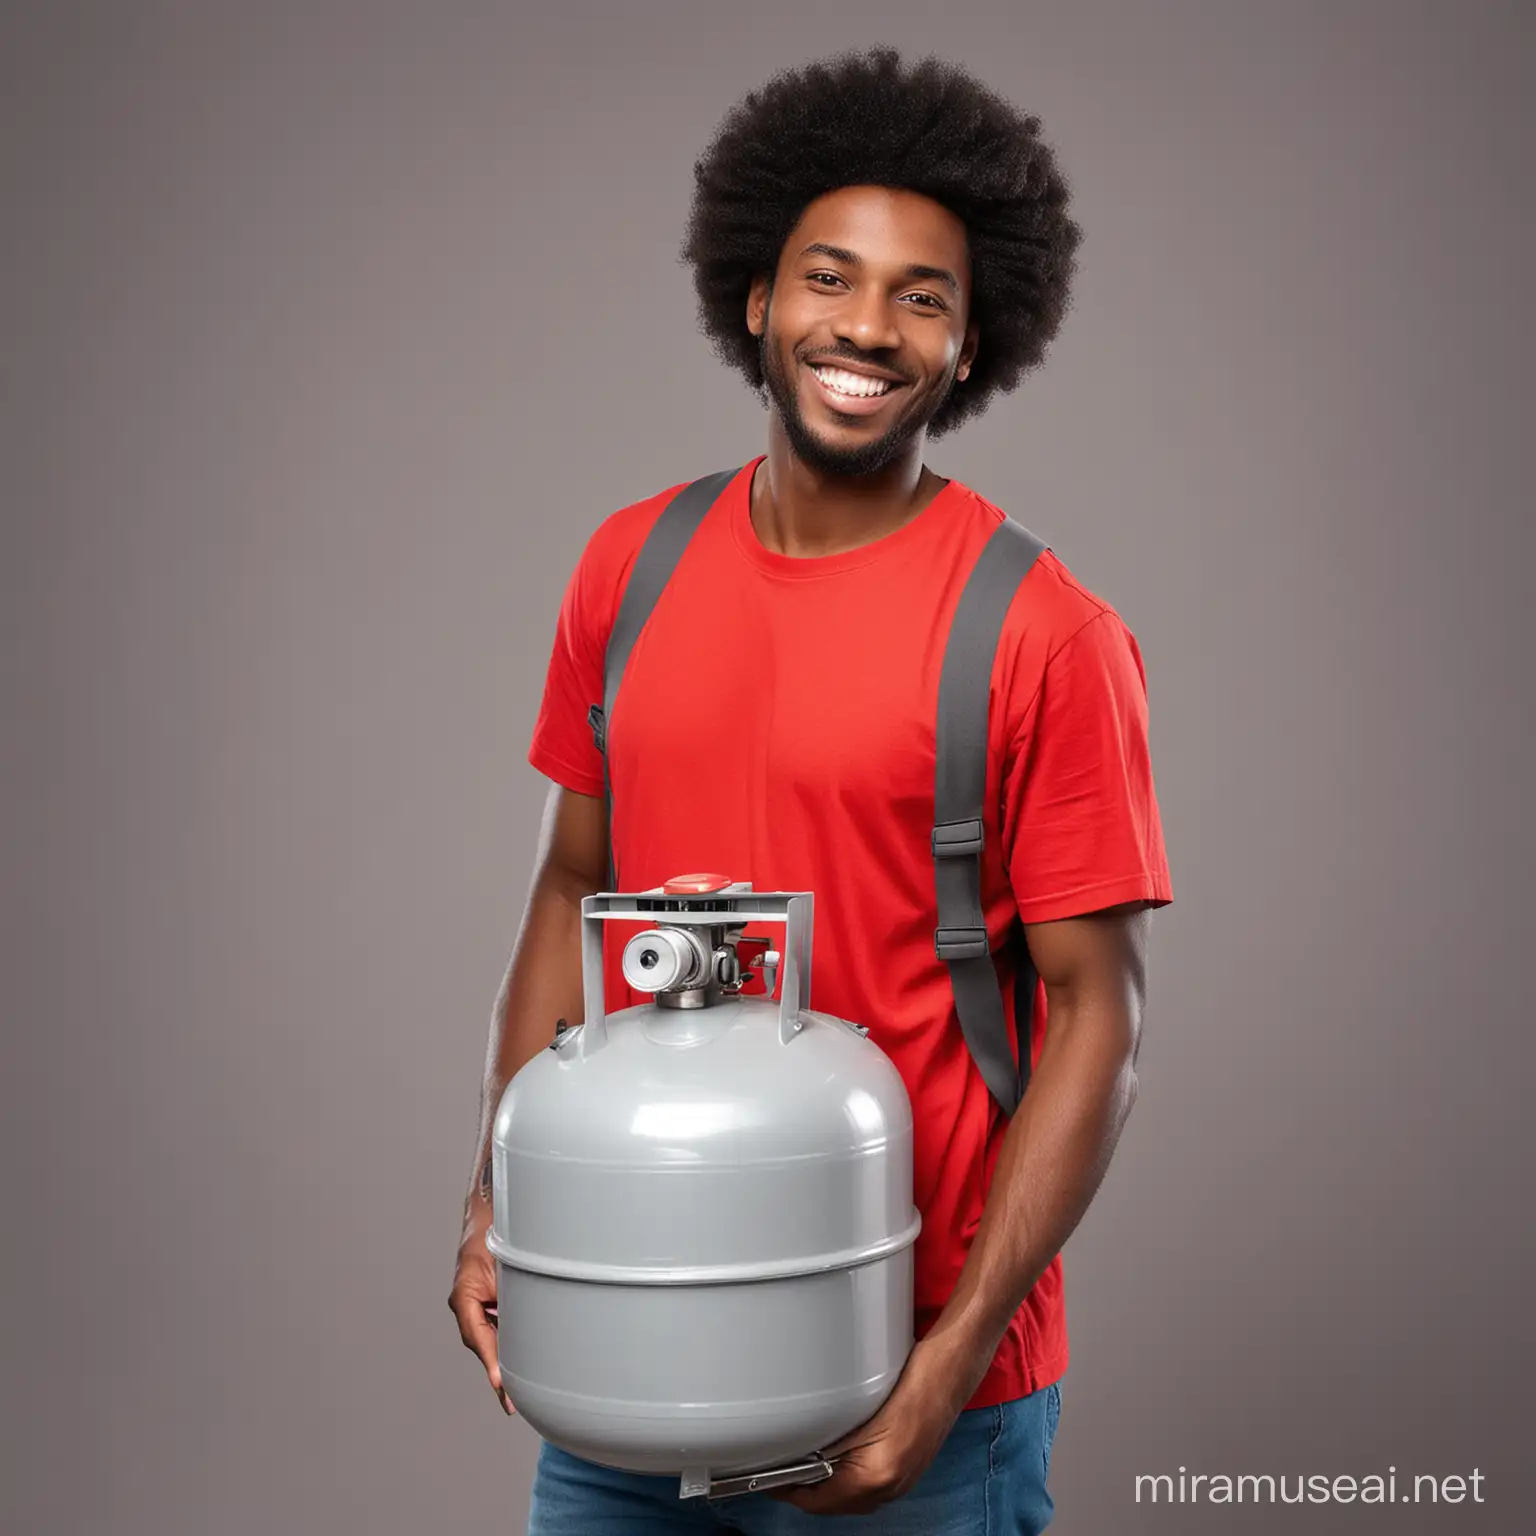 Afro American man carrrying a gas cylinder. Smiling. Red t-shirt. Grey background